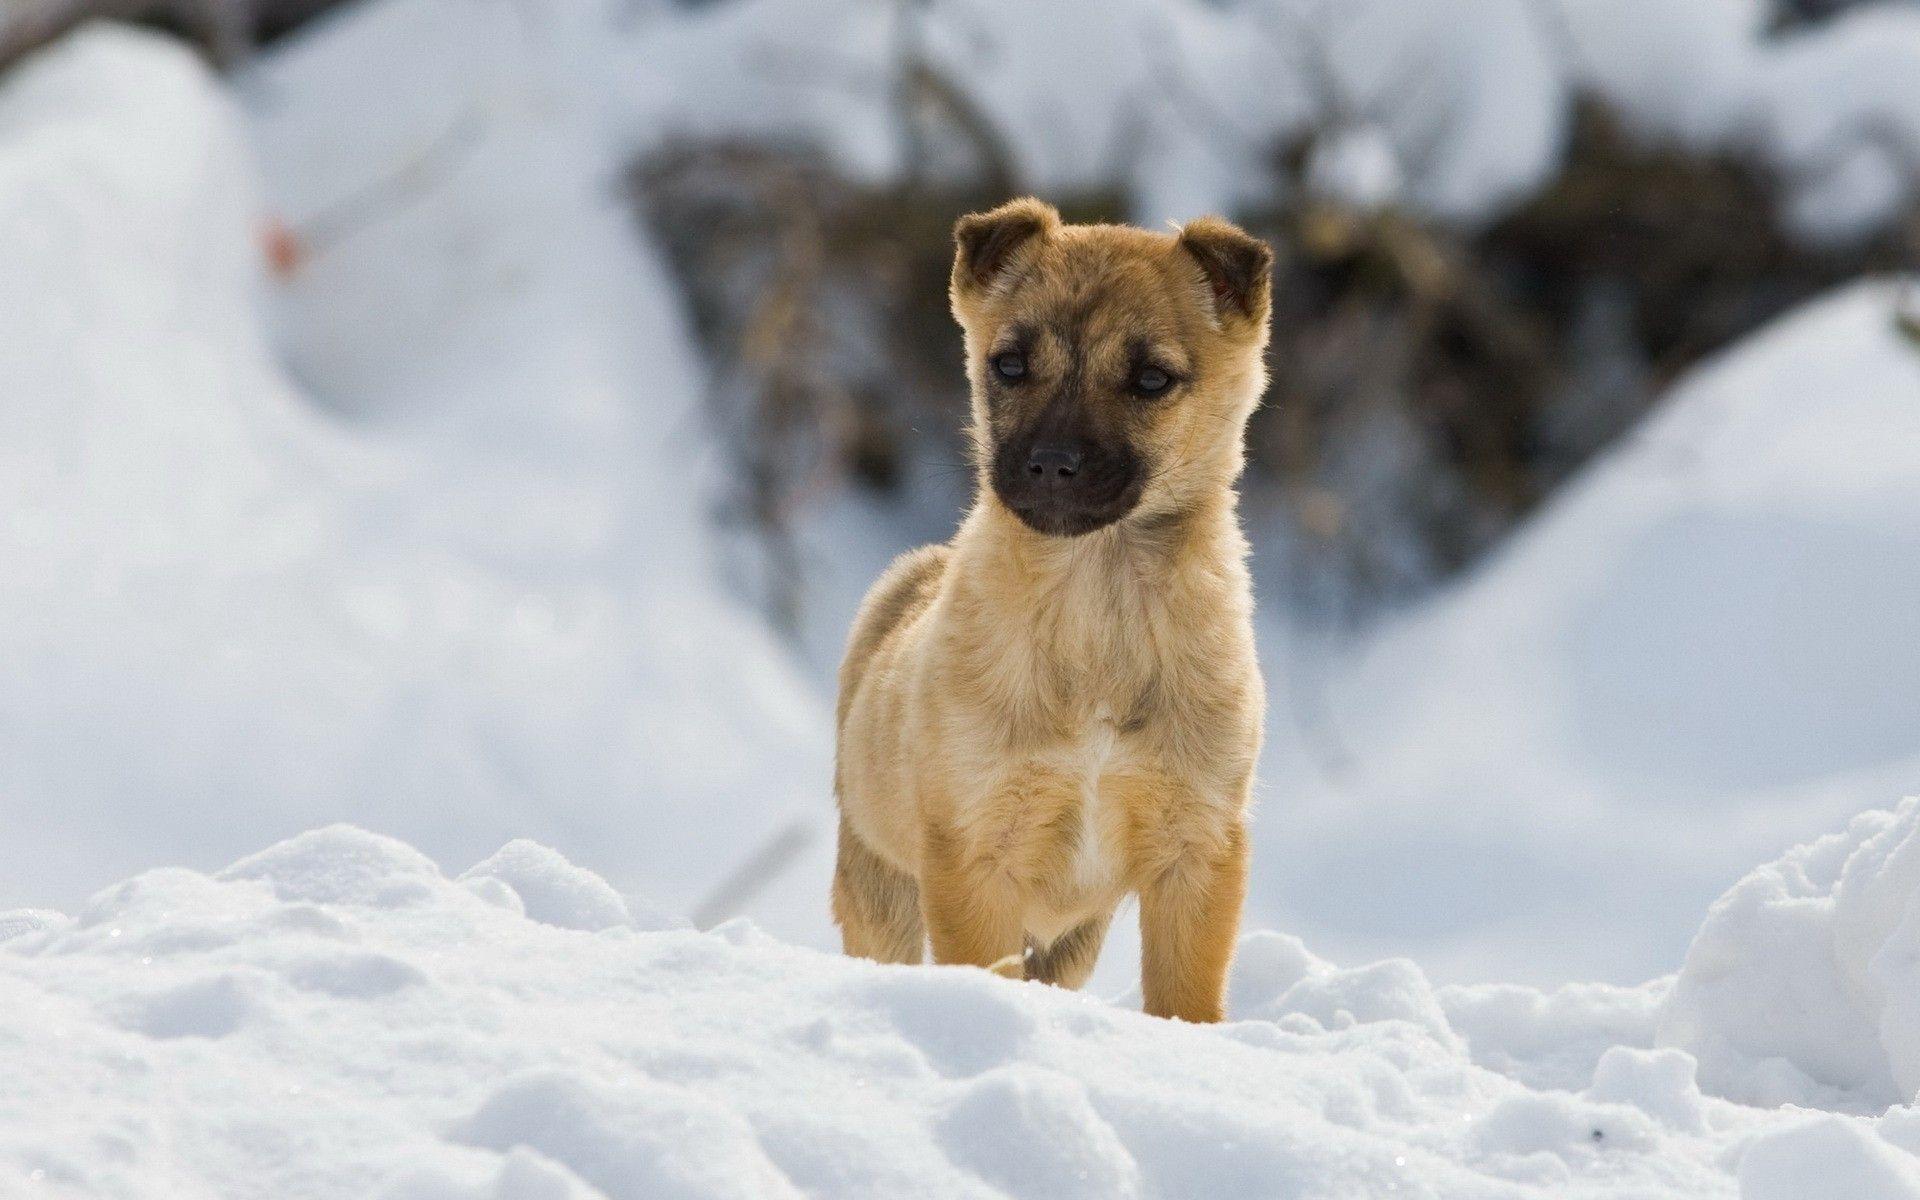 Documentary animals dogs pets snow wallpaper